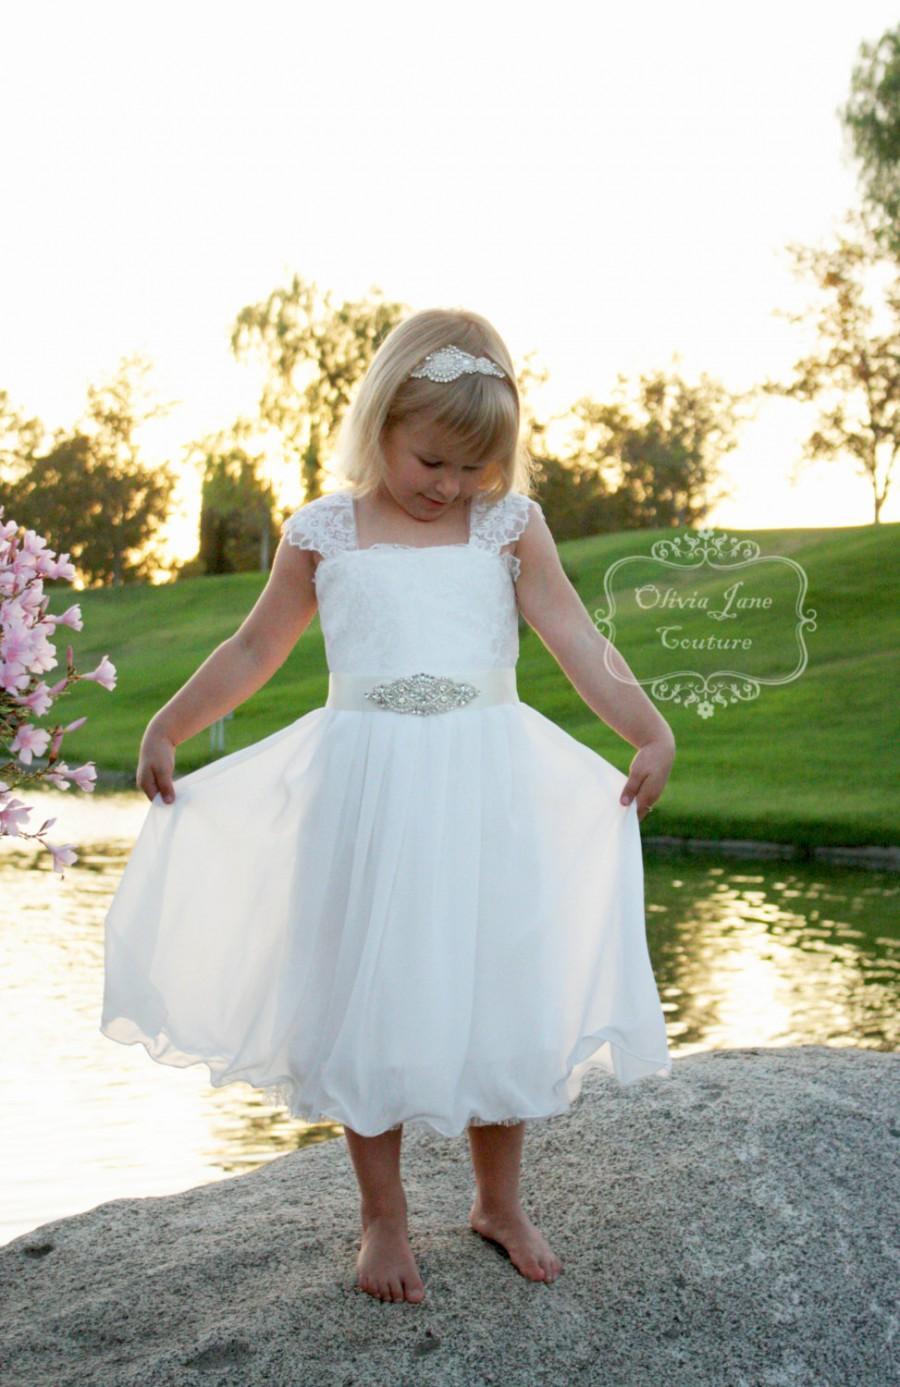 Mariage - Claire Flower Girl Dress - Ivory Lace Flower Girl Dress - Birthday dress - Baptism dress - Boho Flower Girl Dress-Girls White Chiffon Dress